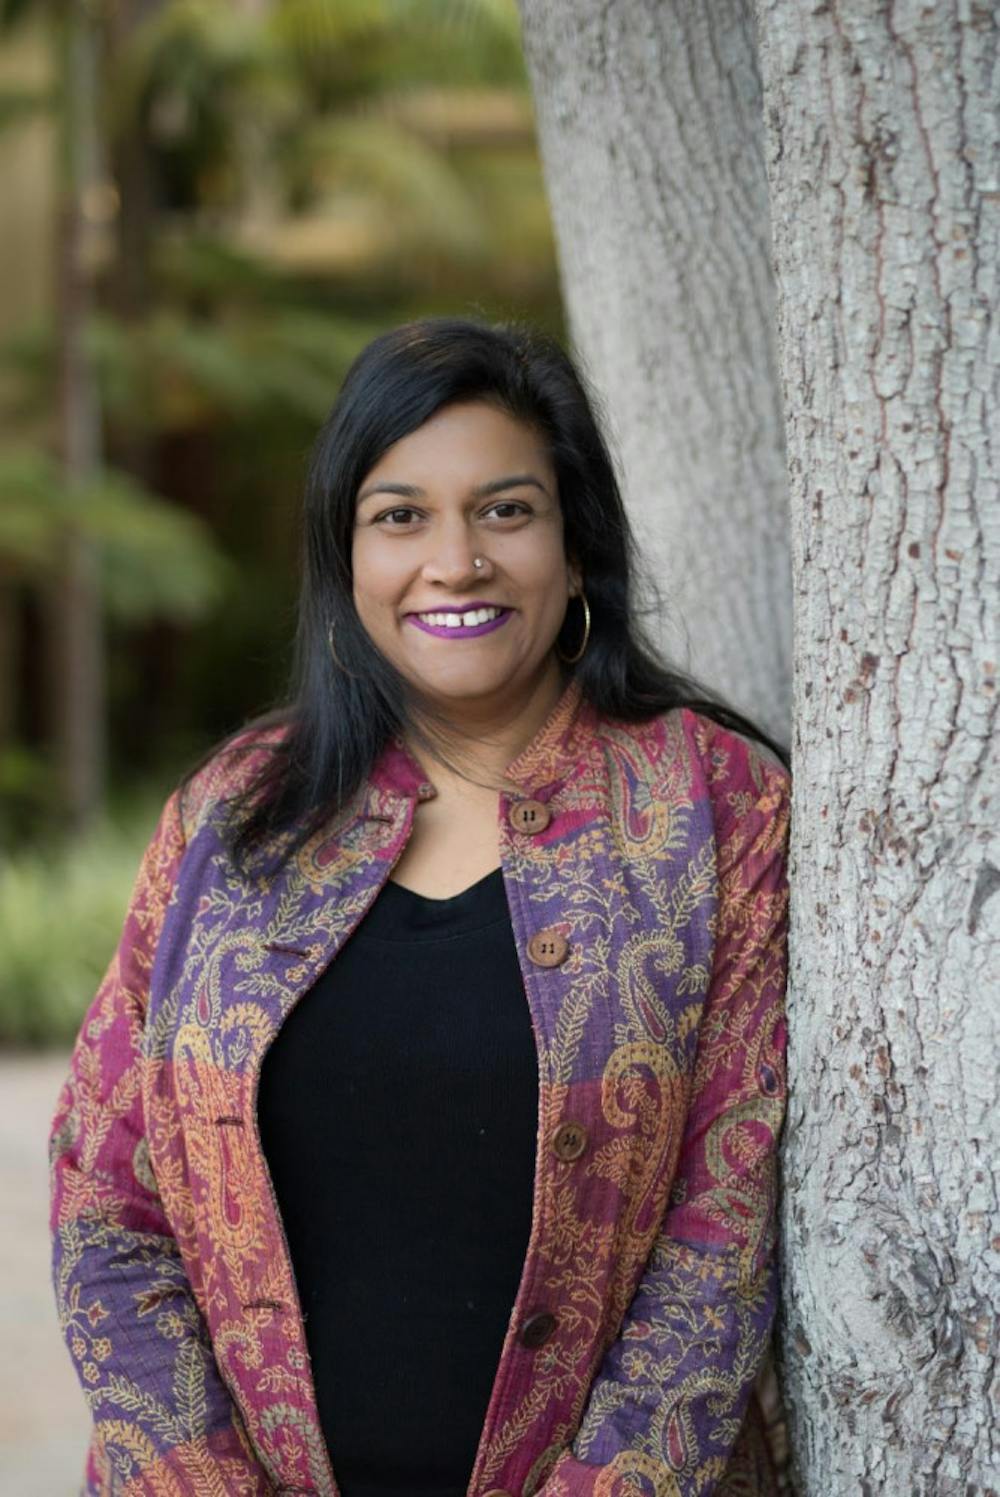 <a href="https://middleburycampus.com/55855/news/smita-ruzicka-named-as-next-vice-president-of-student-affairs/attachment/img_9459-2/" rel="attachment wp-att-55857"></a> <span class="photocreditinline">Courtesy Photo</span><br />The college announced today that Smita Ruzicka will serve as the next vice president of student affairs. She comes to Middlebury from Johns Hopkins University, where she served as the dean of student life.